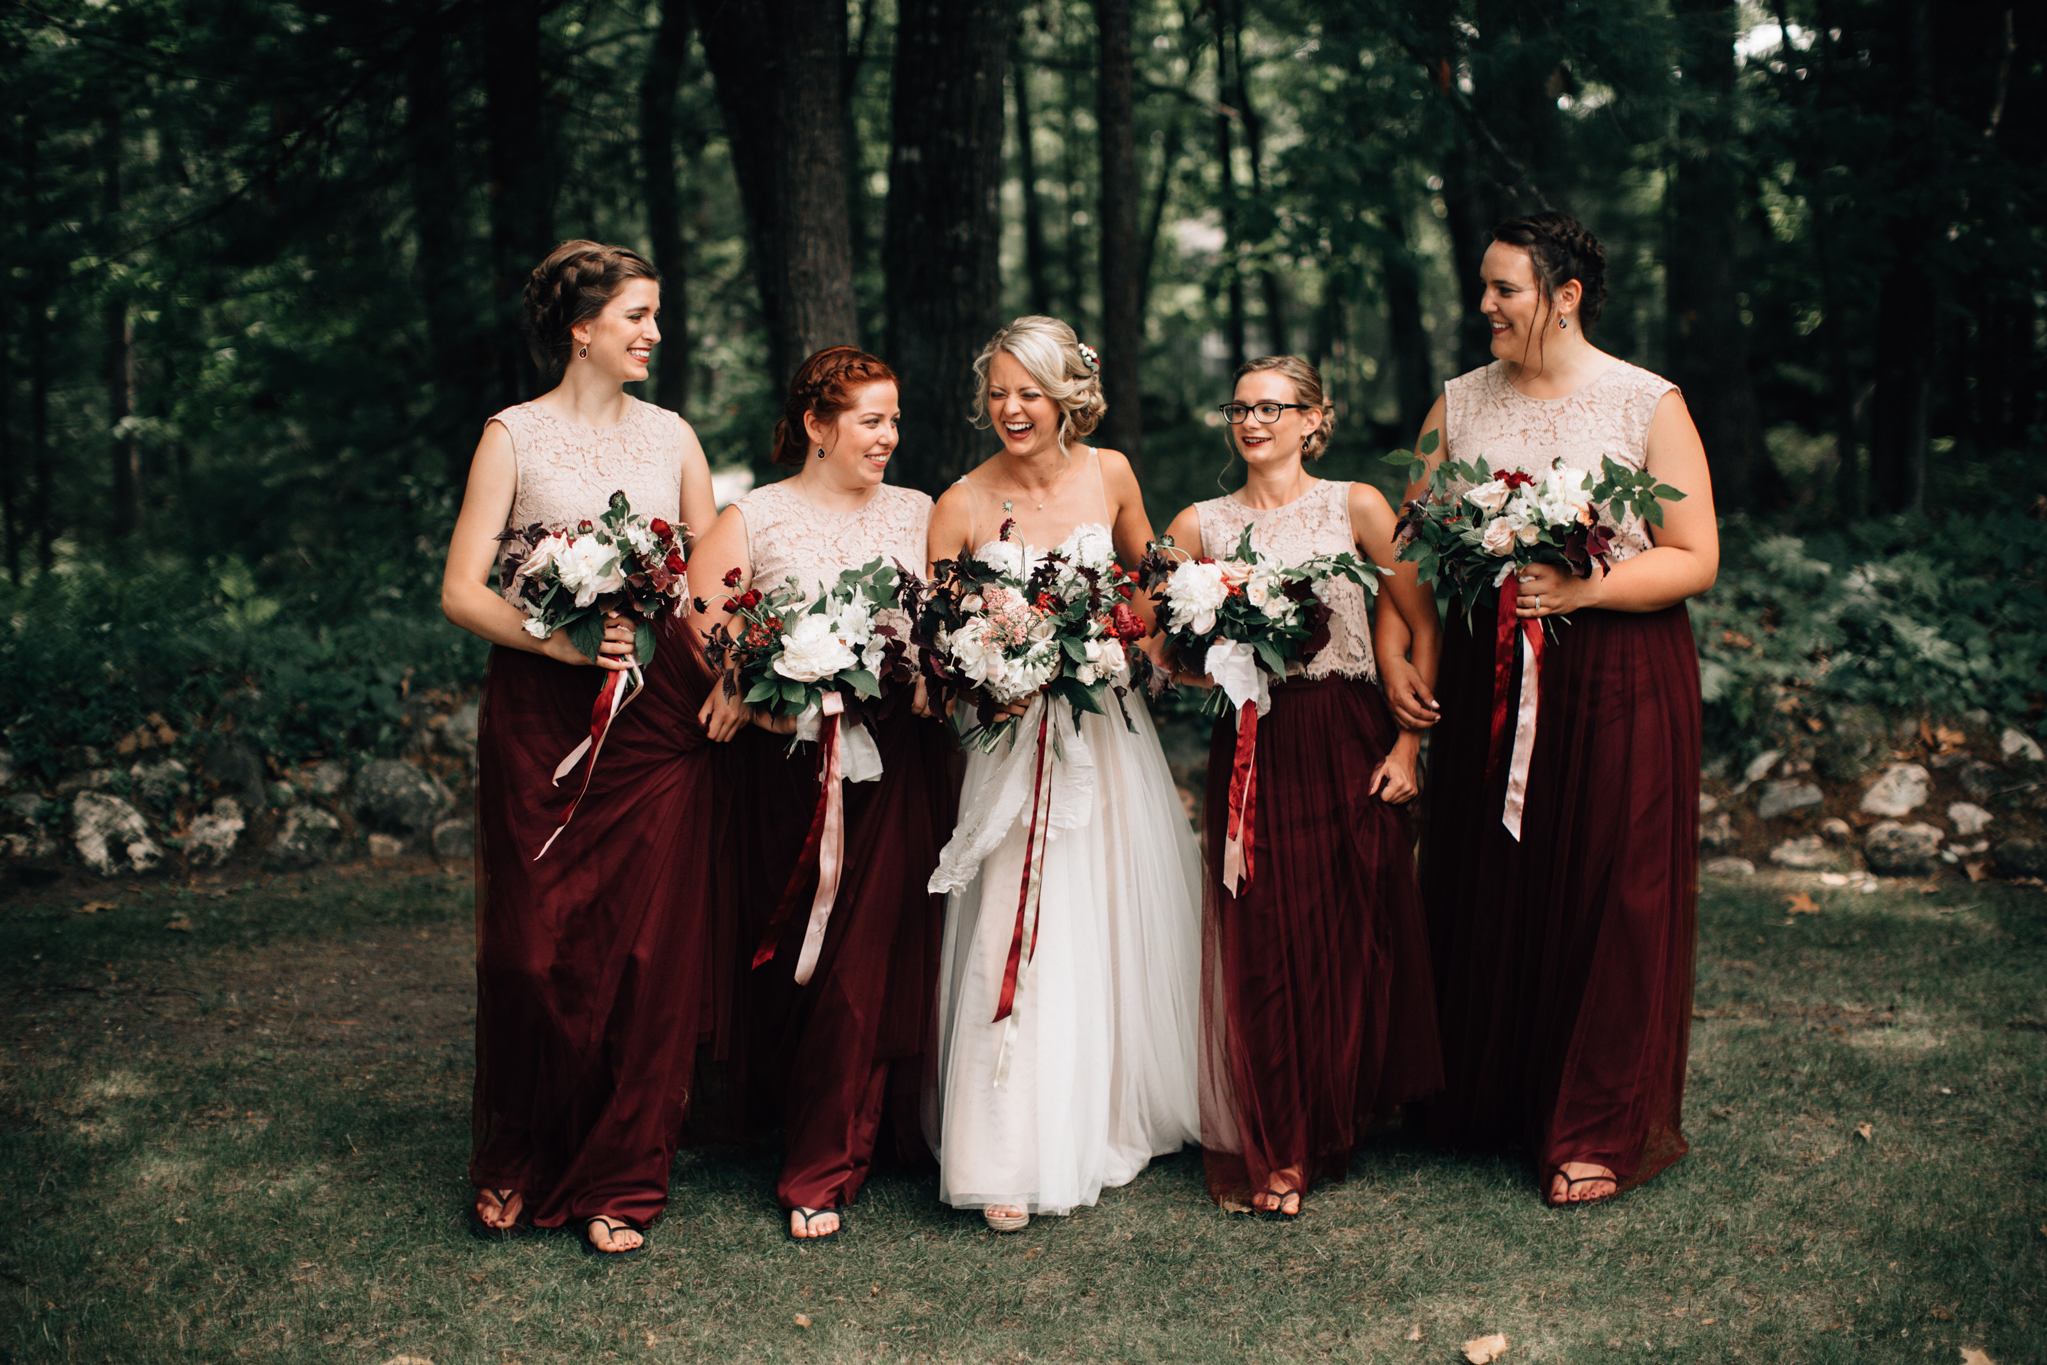 Burgundy and Blush Wedding | The Day's Design | Bethany Small Photography